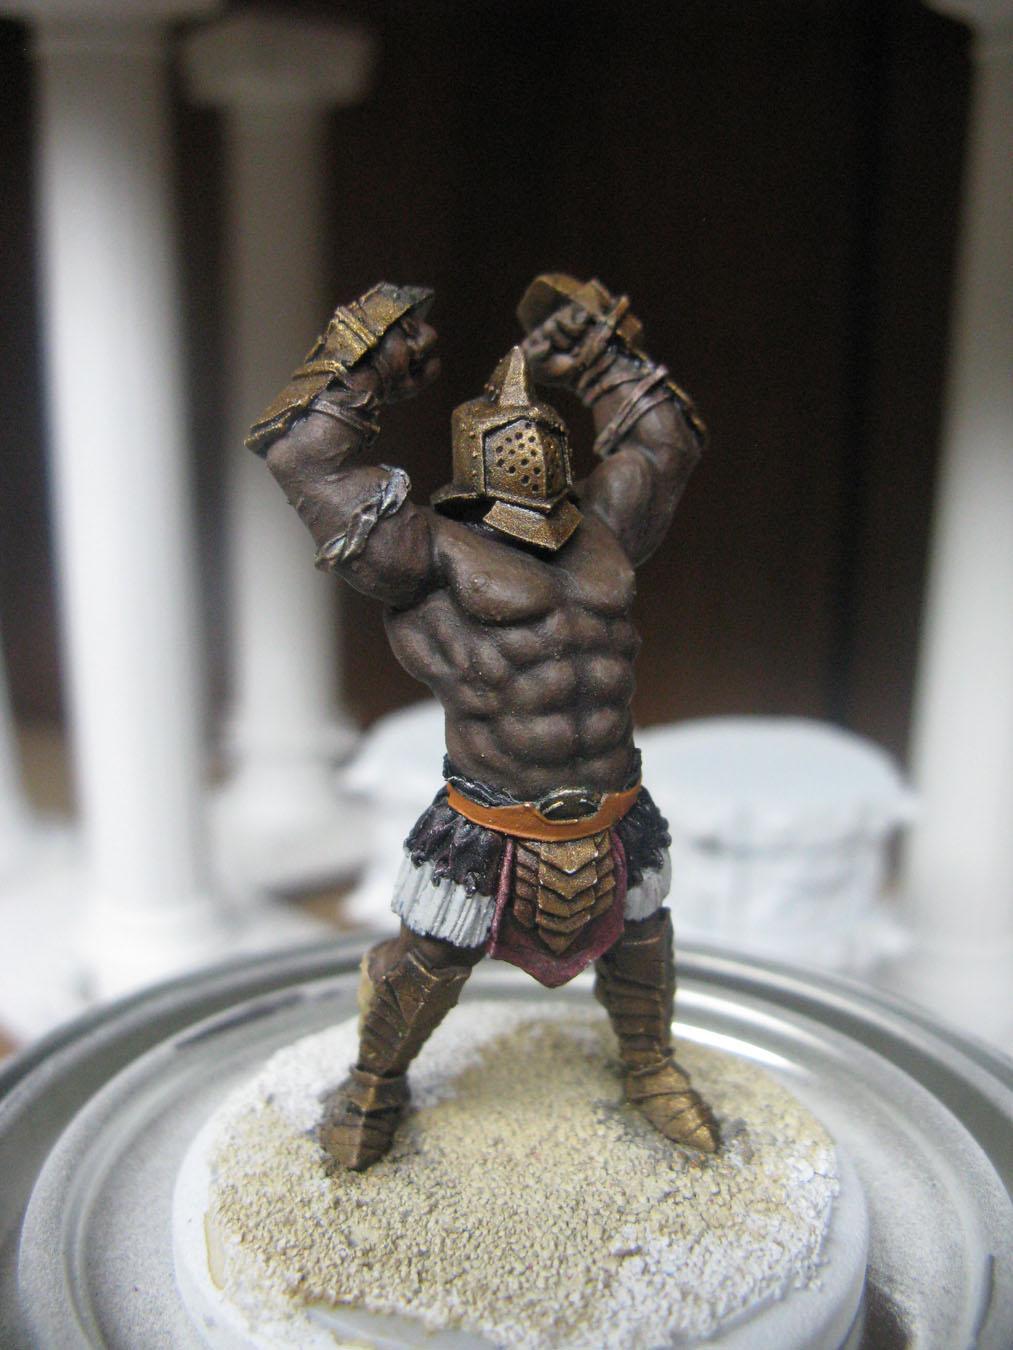 A miniature model shows the heavy metal and thick leather wrapped around the gladiator's arms, allowing him to deliver devastating punches.